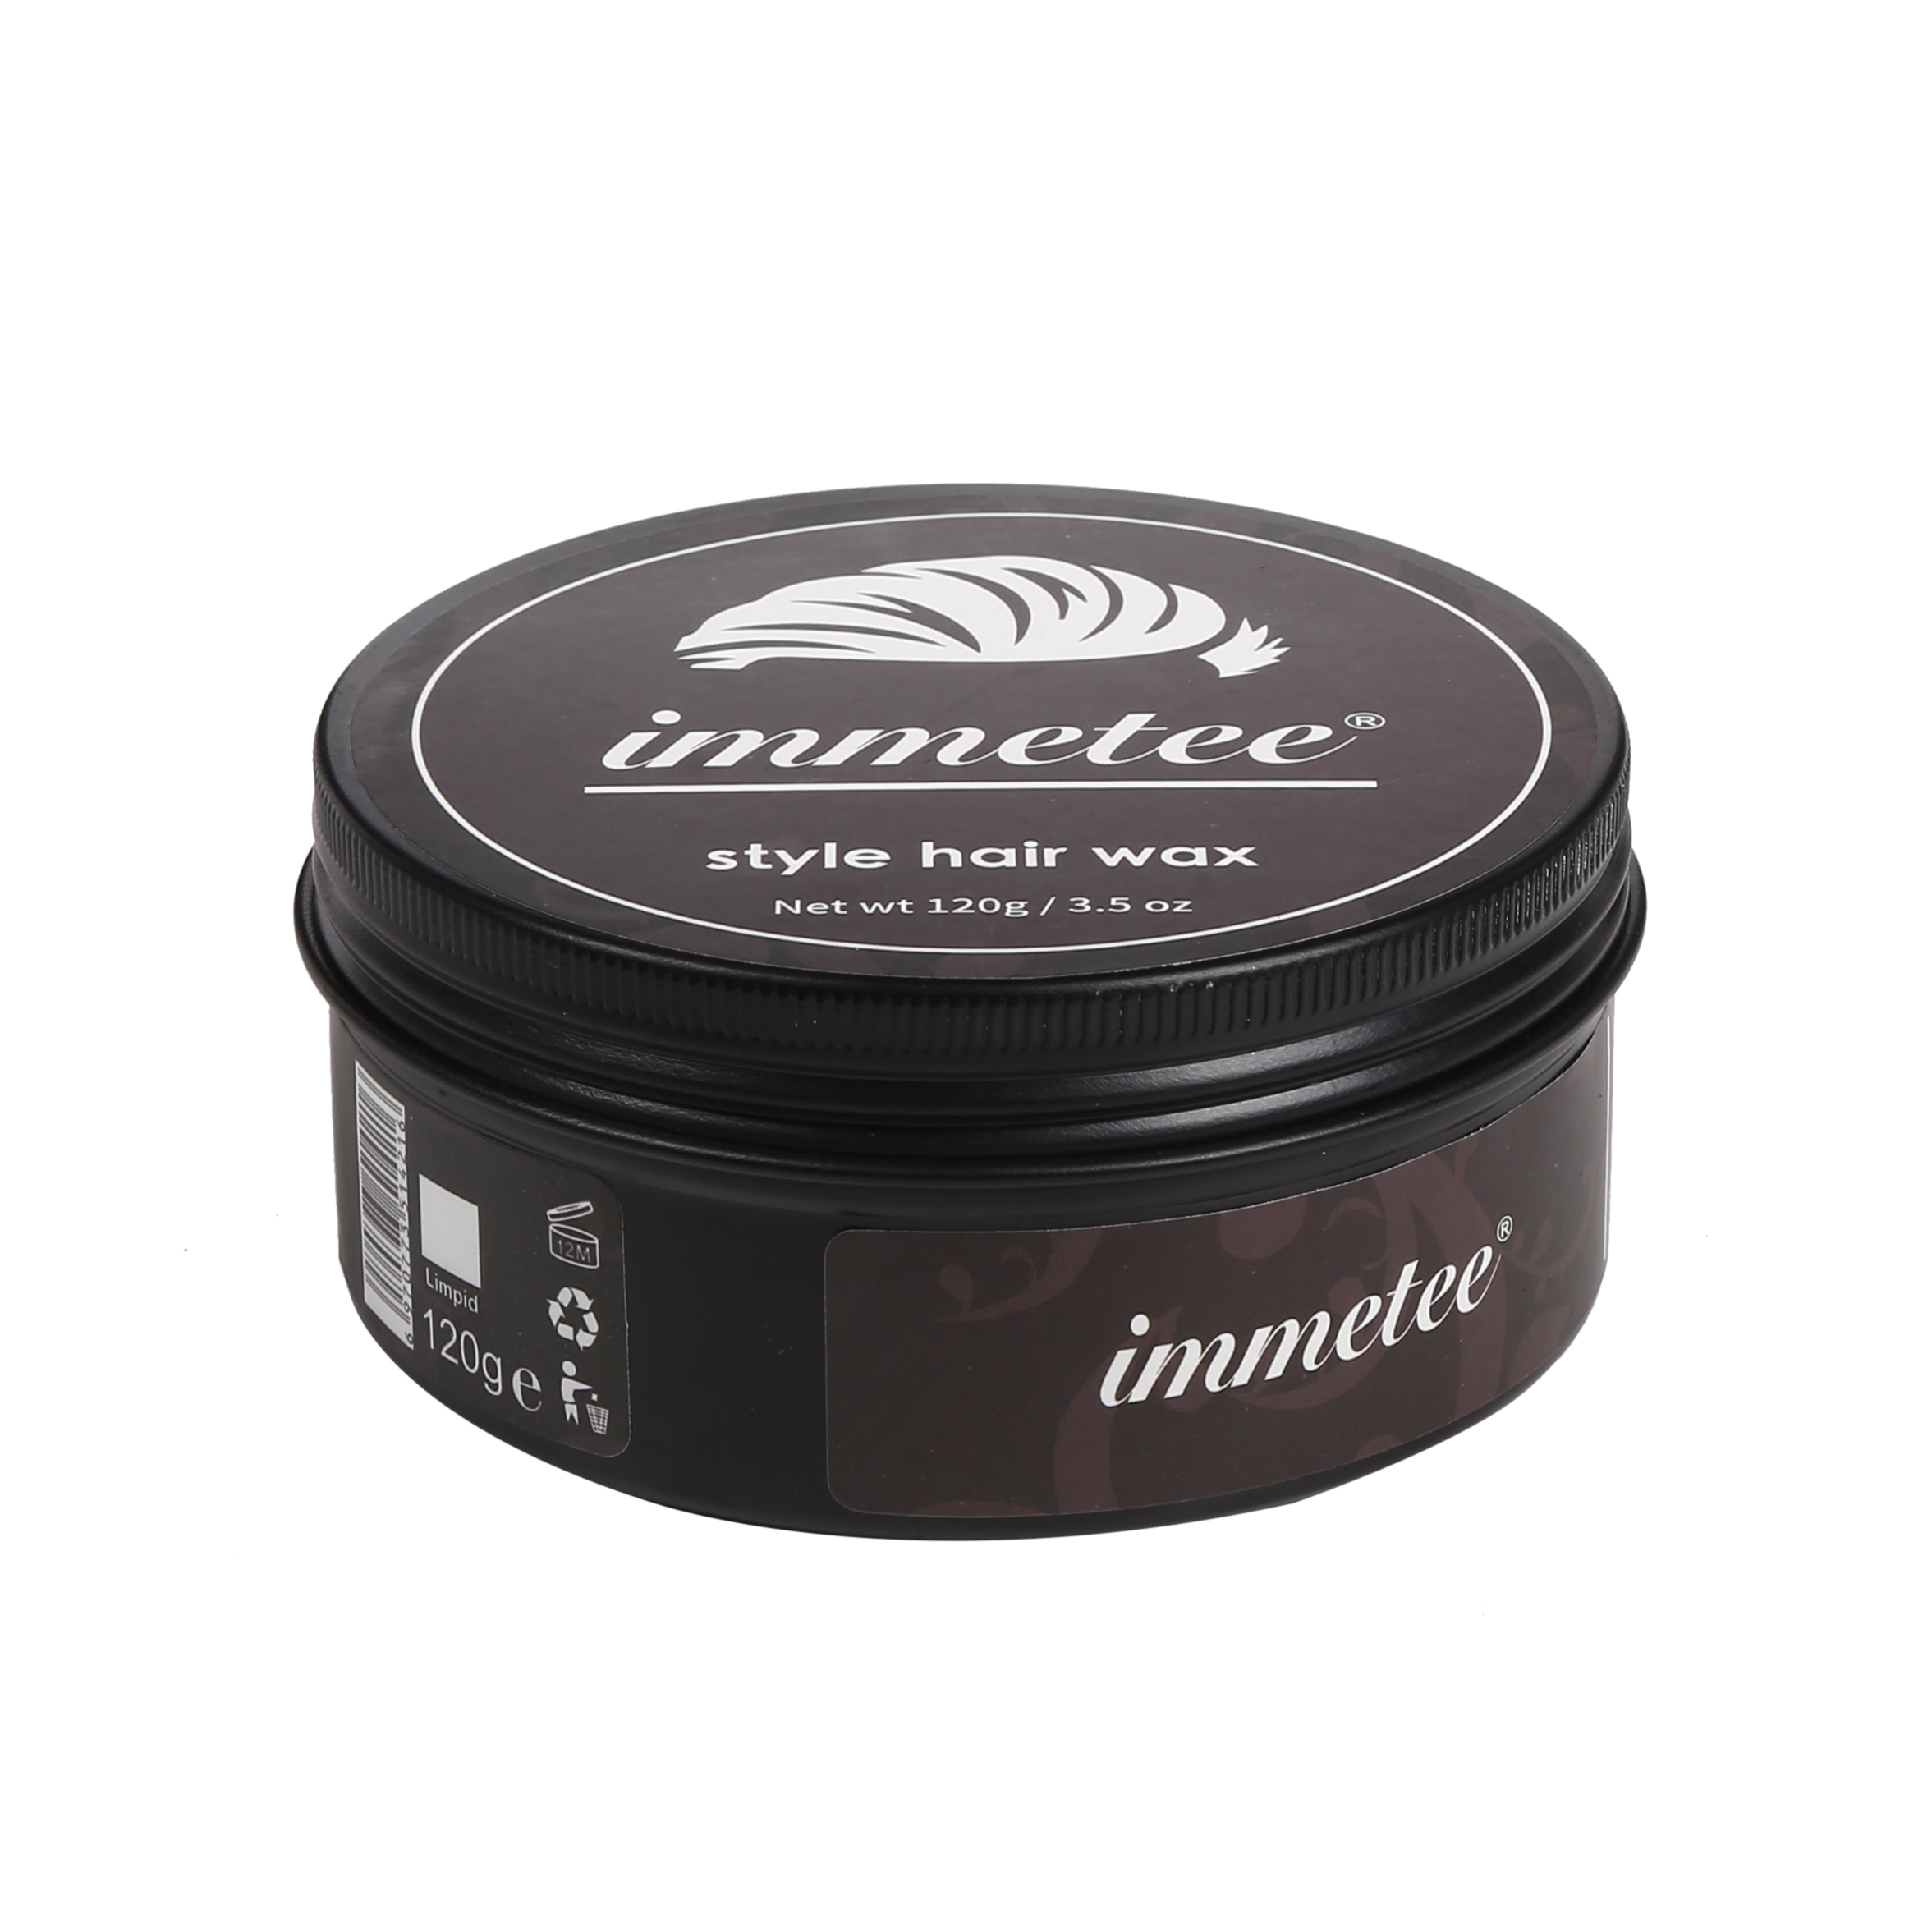 IMMETEE New Product Hair Color Wax For Men&Women Hair Styling Transparent Hair Styling Wax/White 120g*2